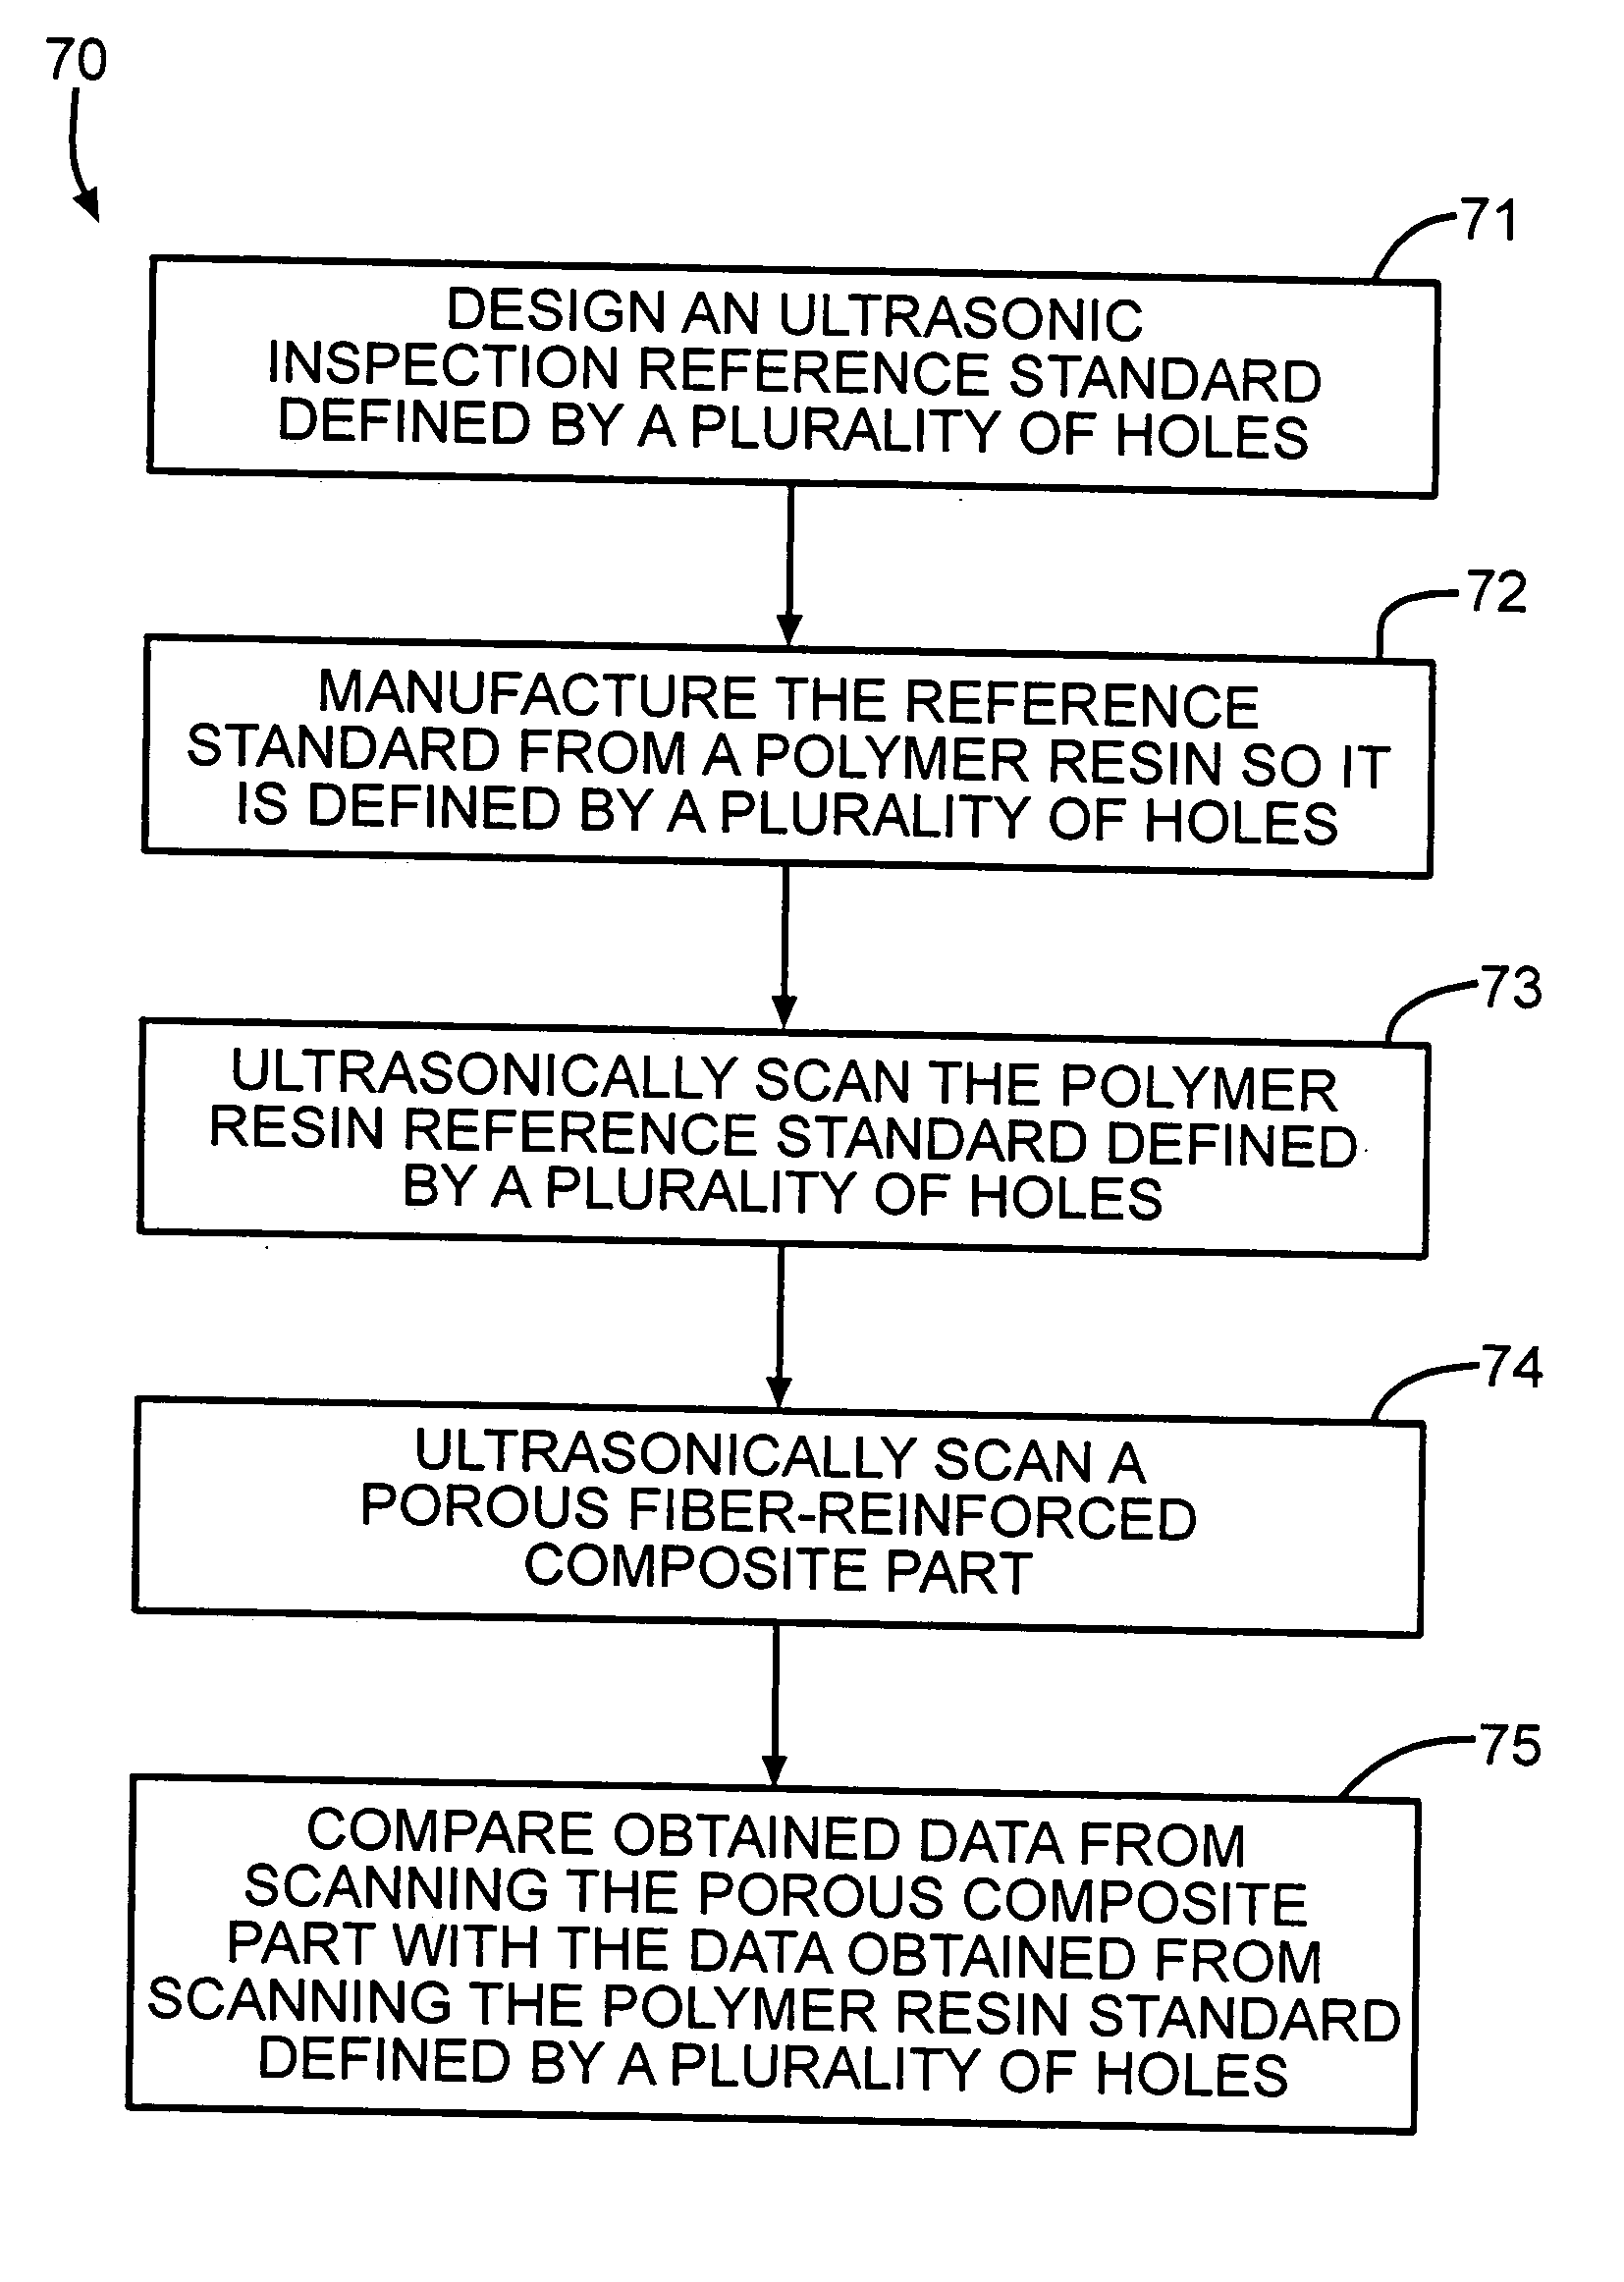 Ultrasonic inspection reference standard for porous composite materials